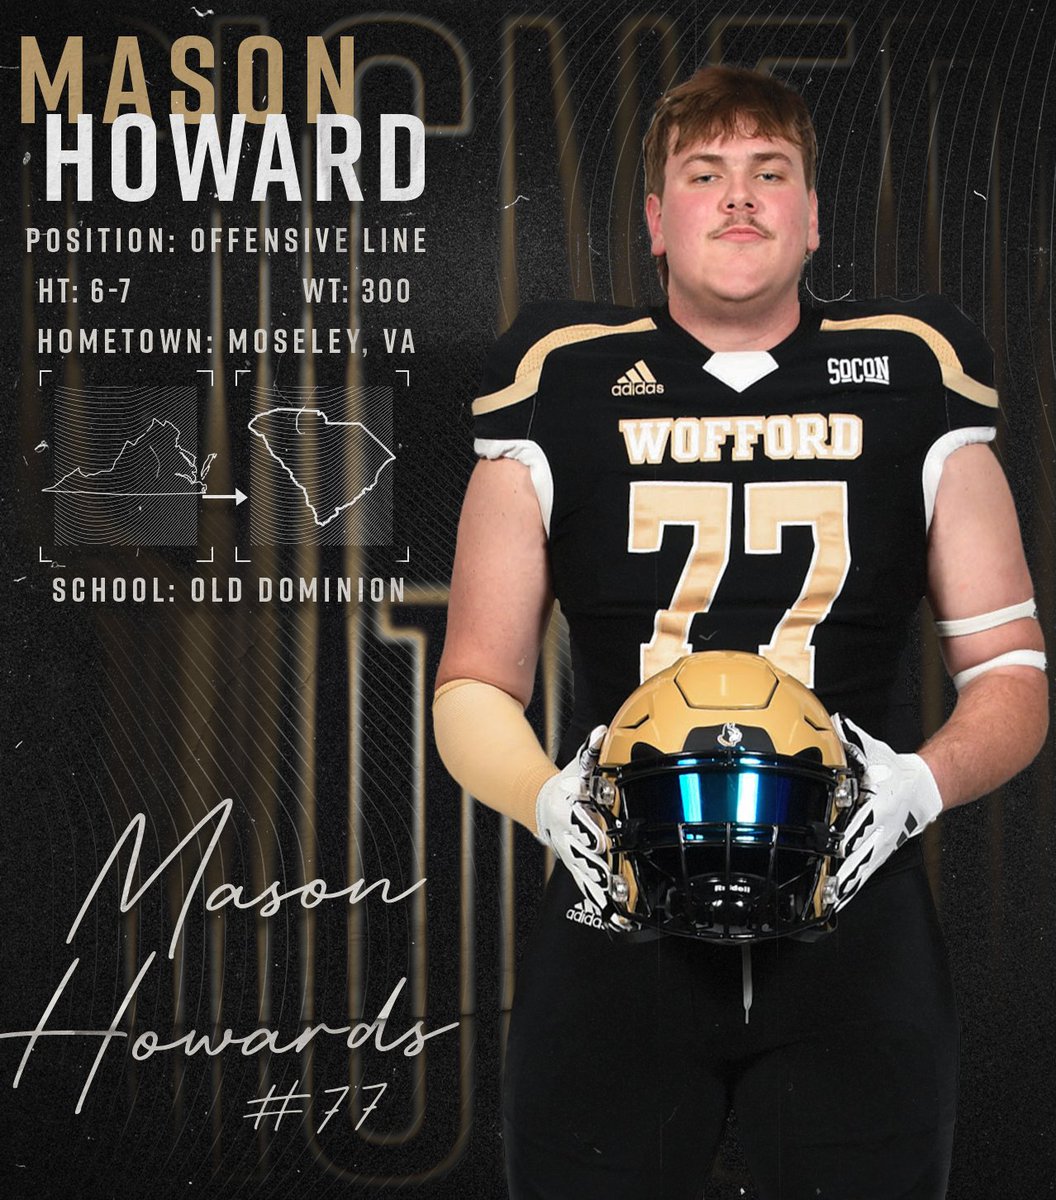 An offensive lineman from Moseley, Virginia, Mason Howard joins the Terriers as a transfer from Old Dominion.